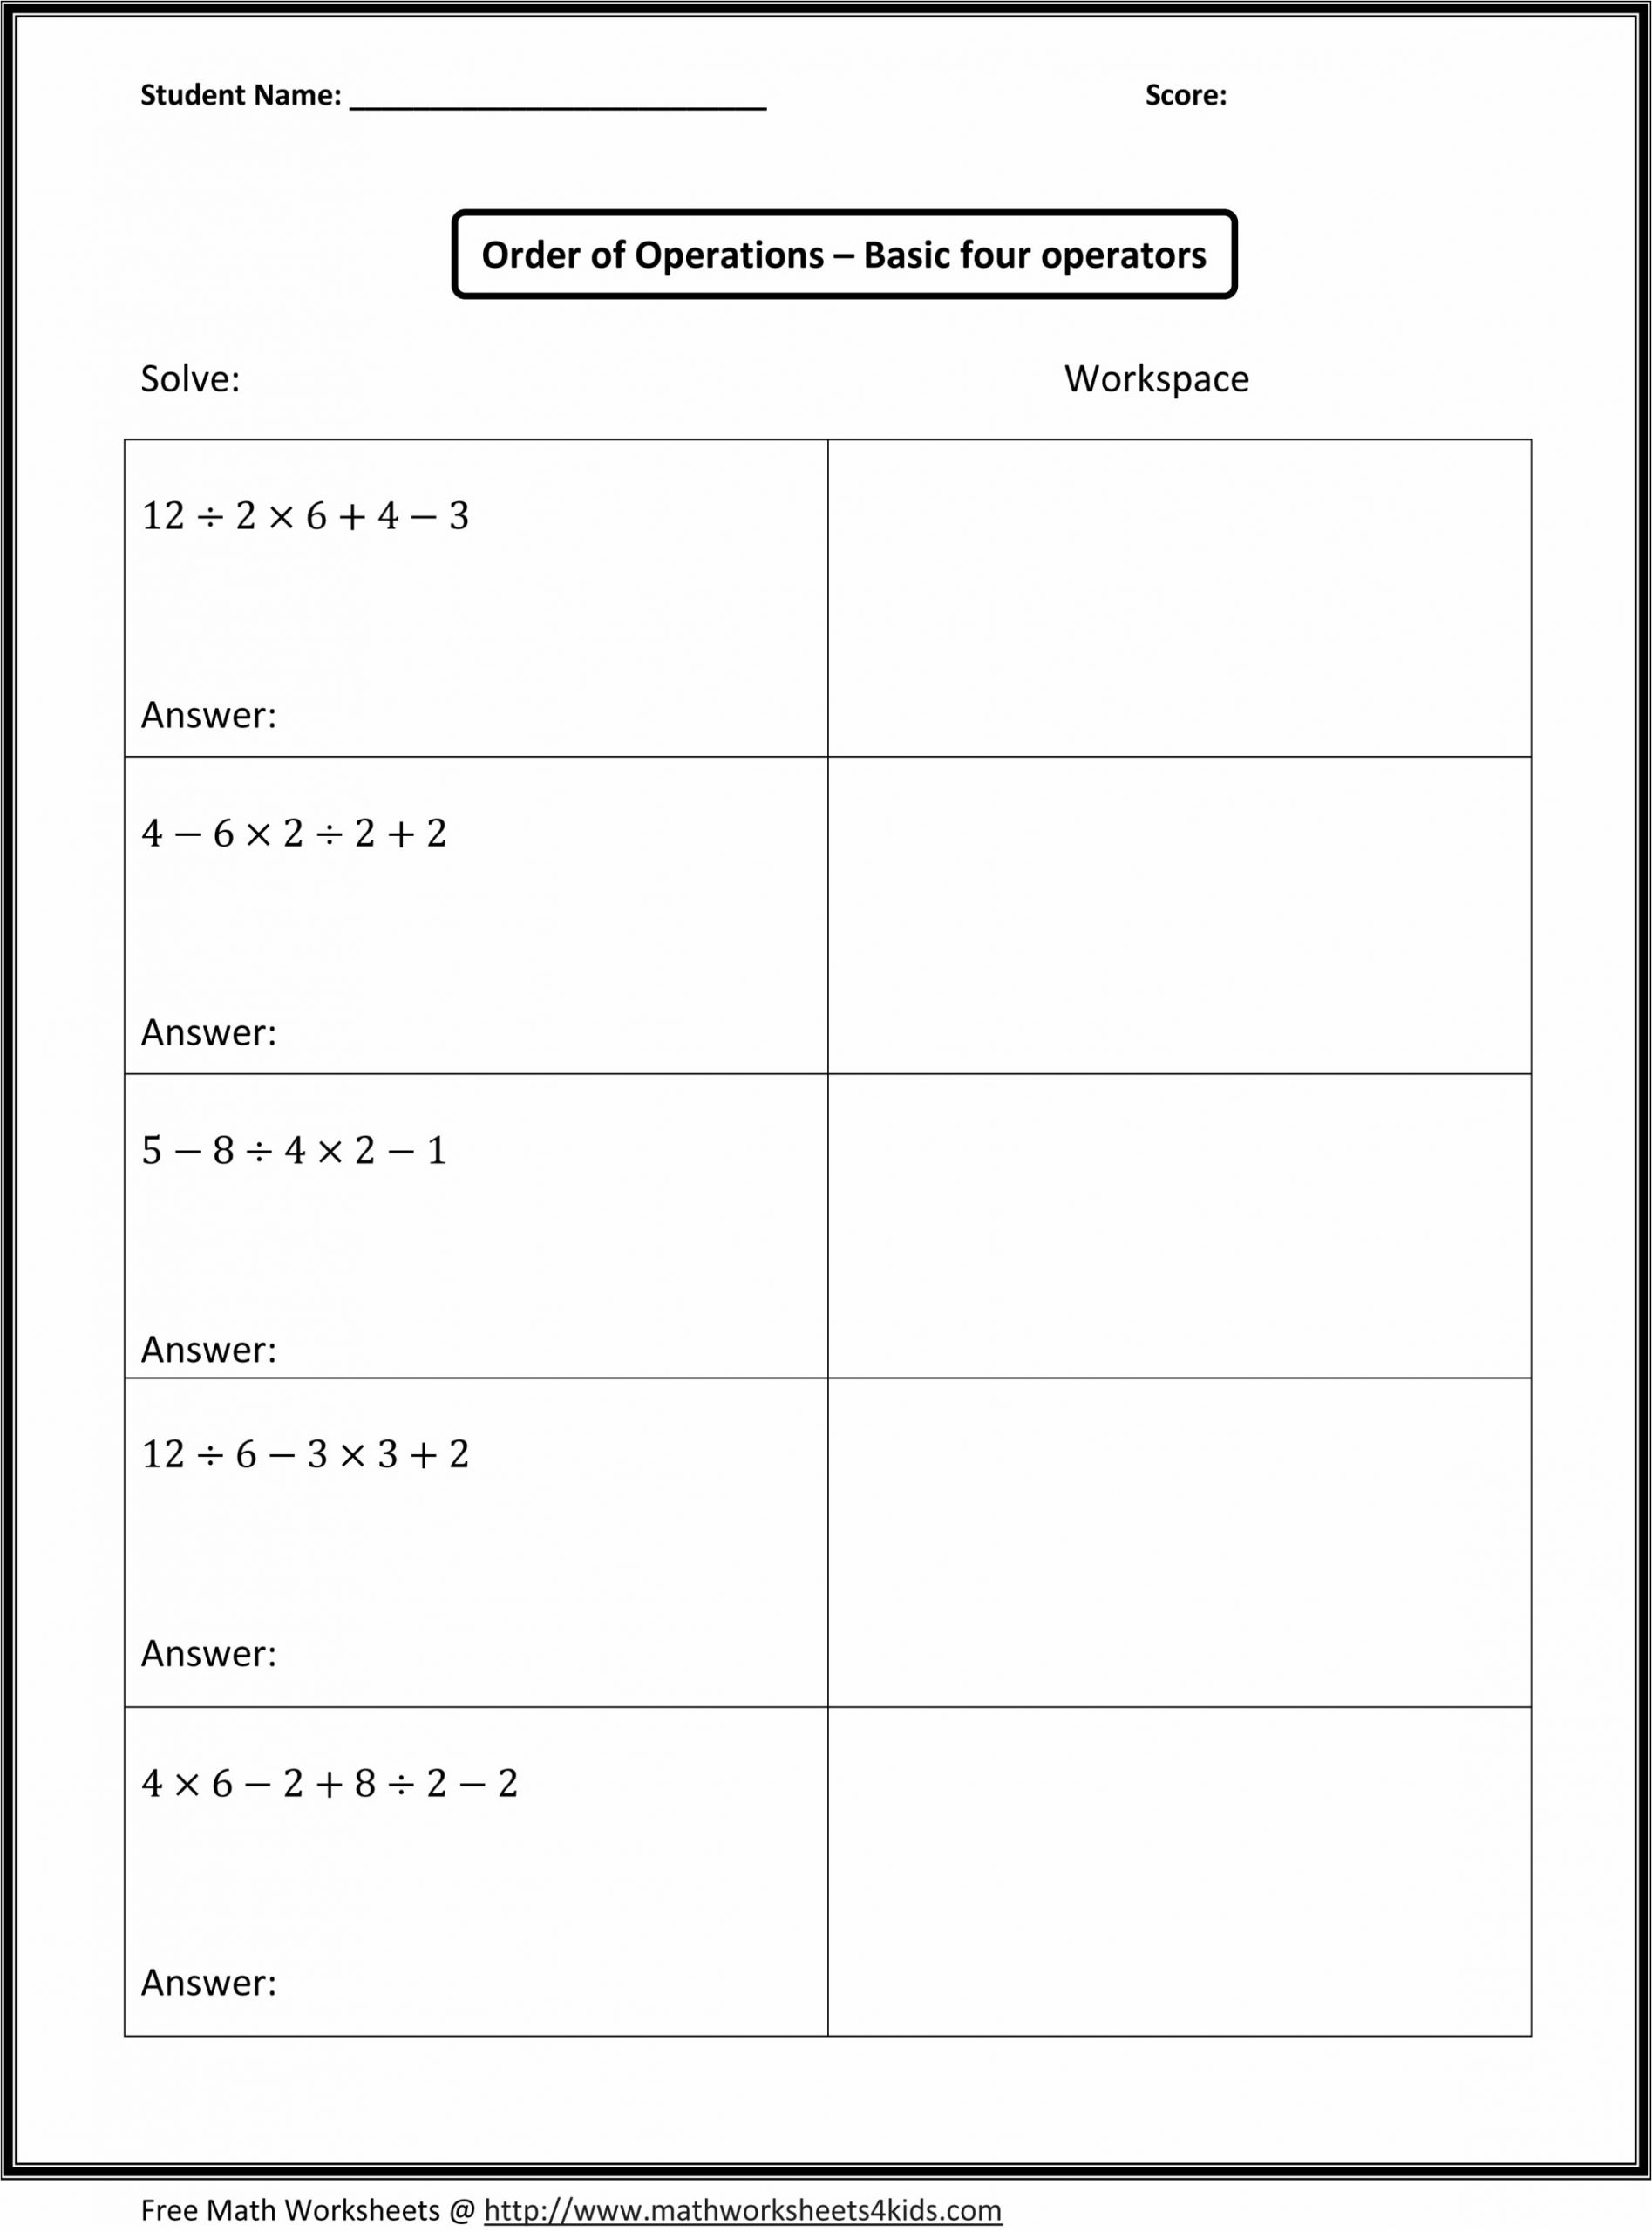 Free Math Worksheets First Grade 1 Addition Add In Columns 2 Digit Plus 1 Digit No Regrouping